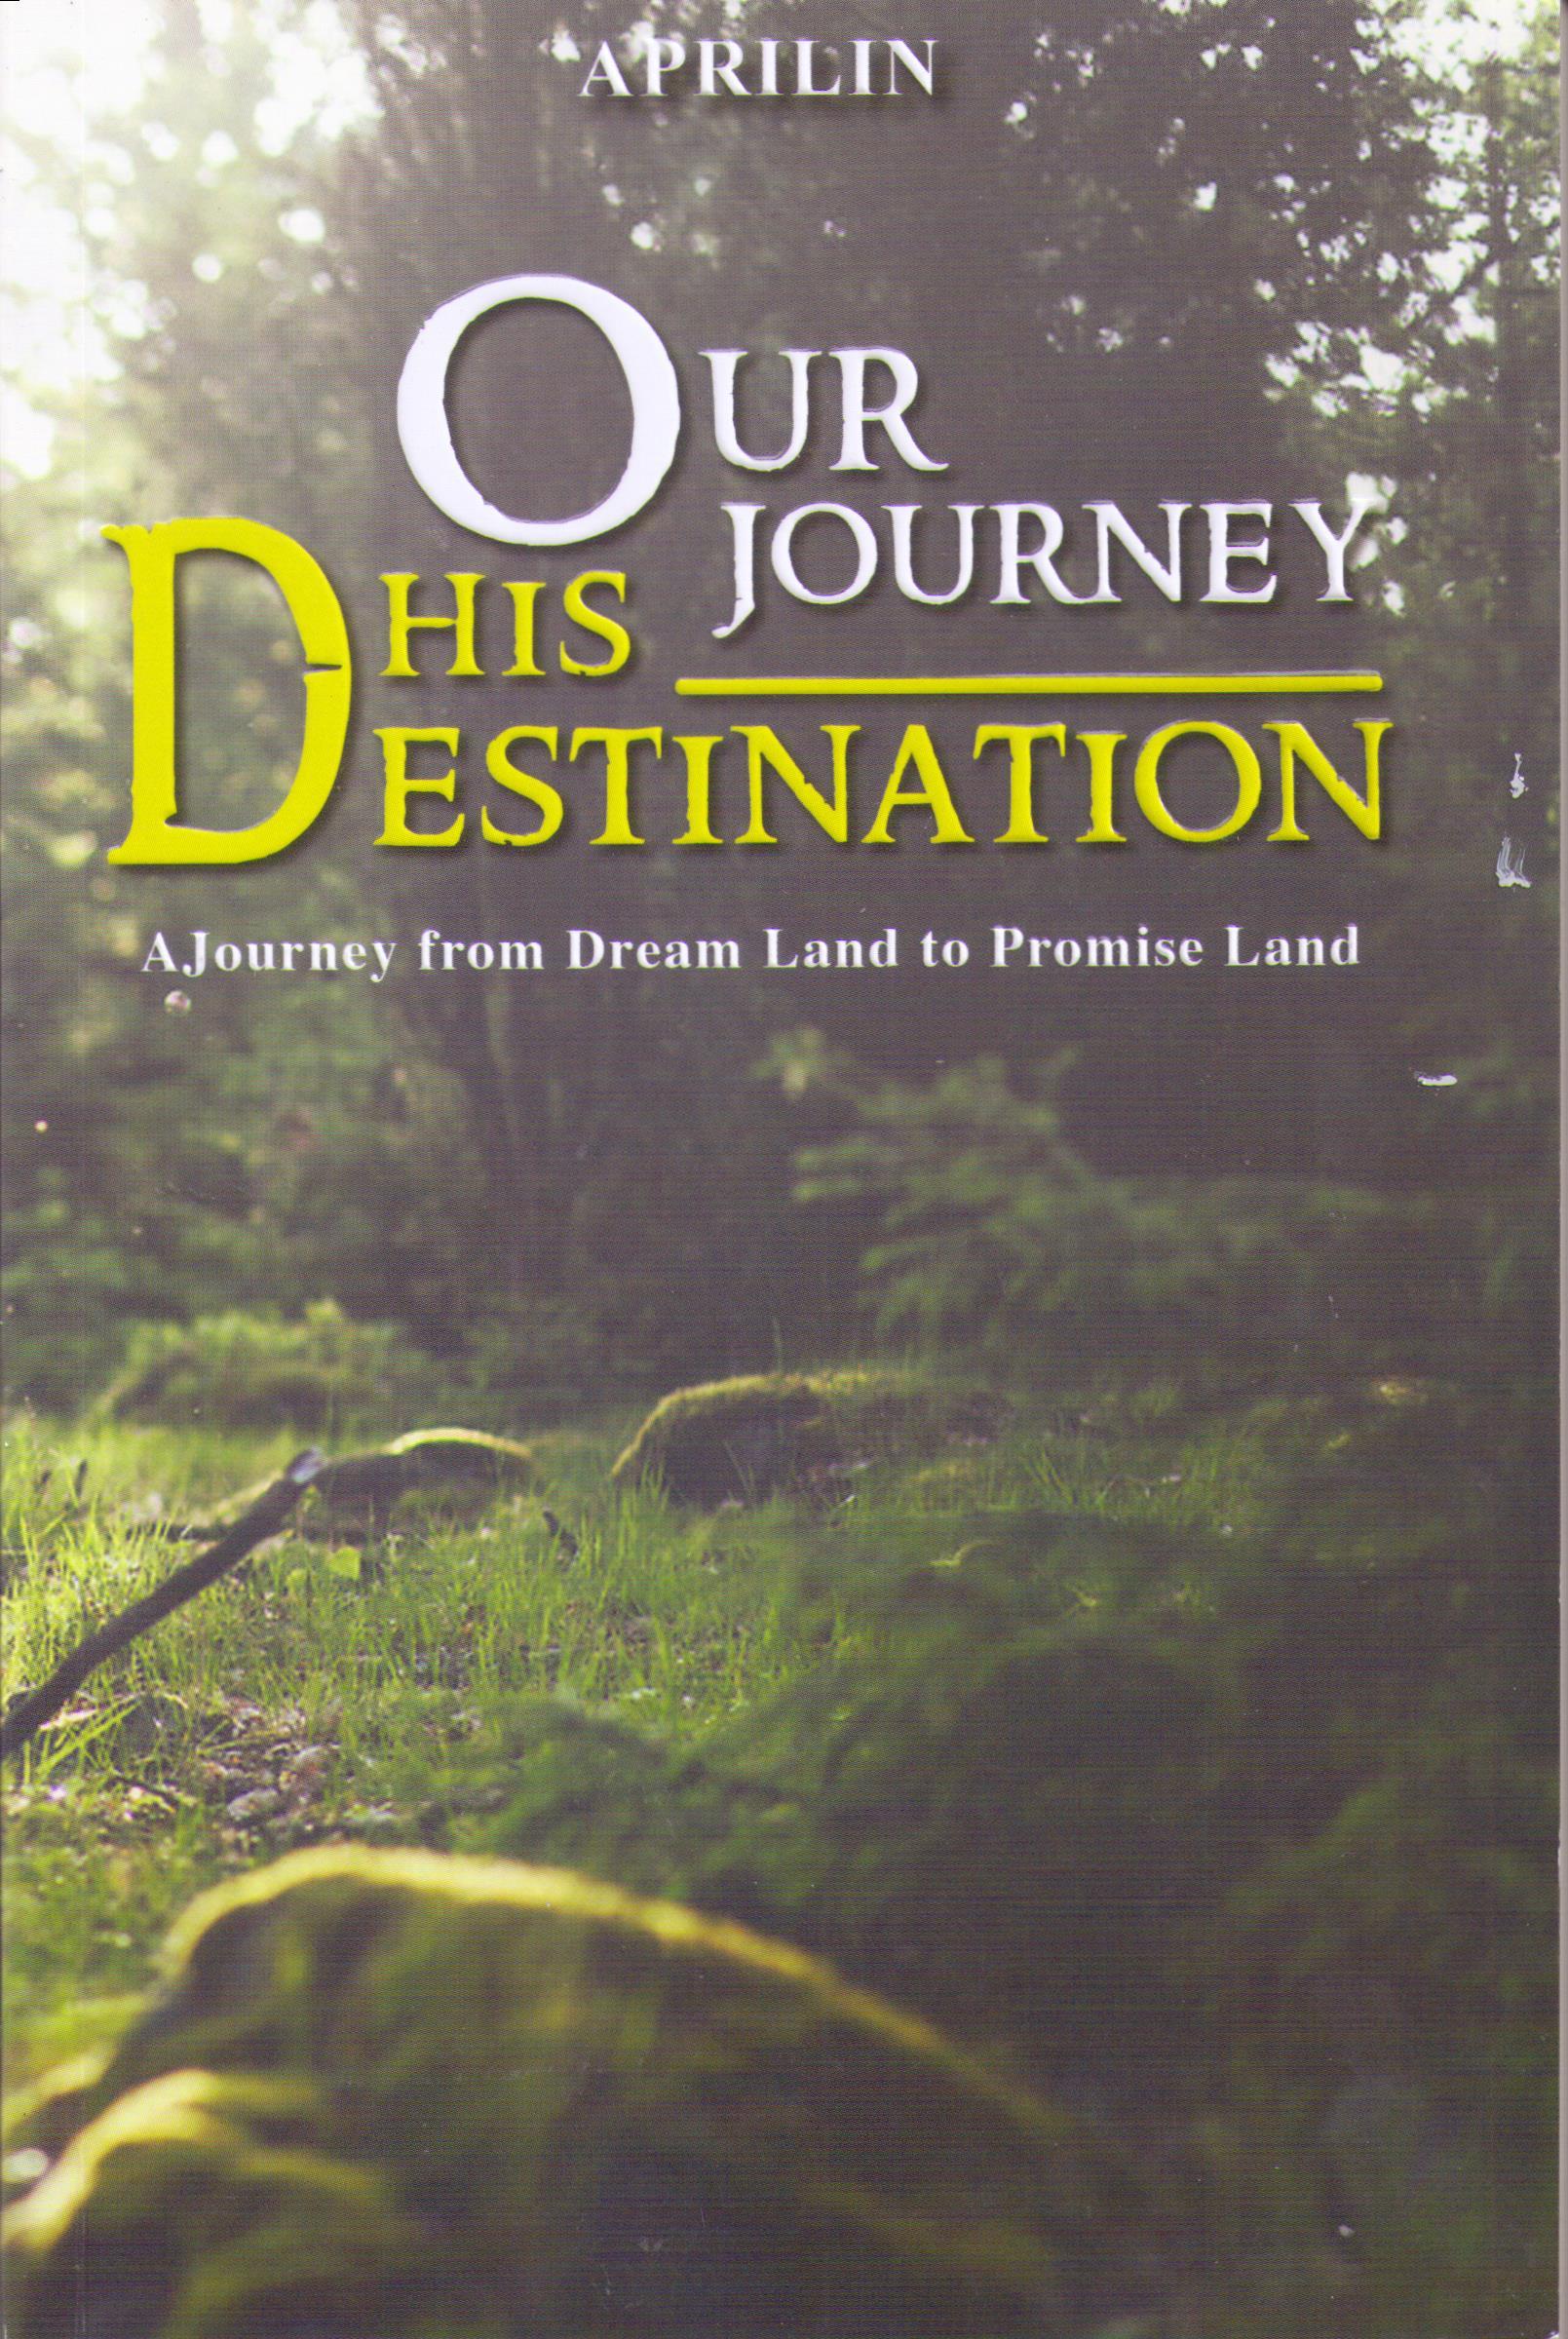 Our Journey his destination :  a journey from dream land to promise land